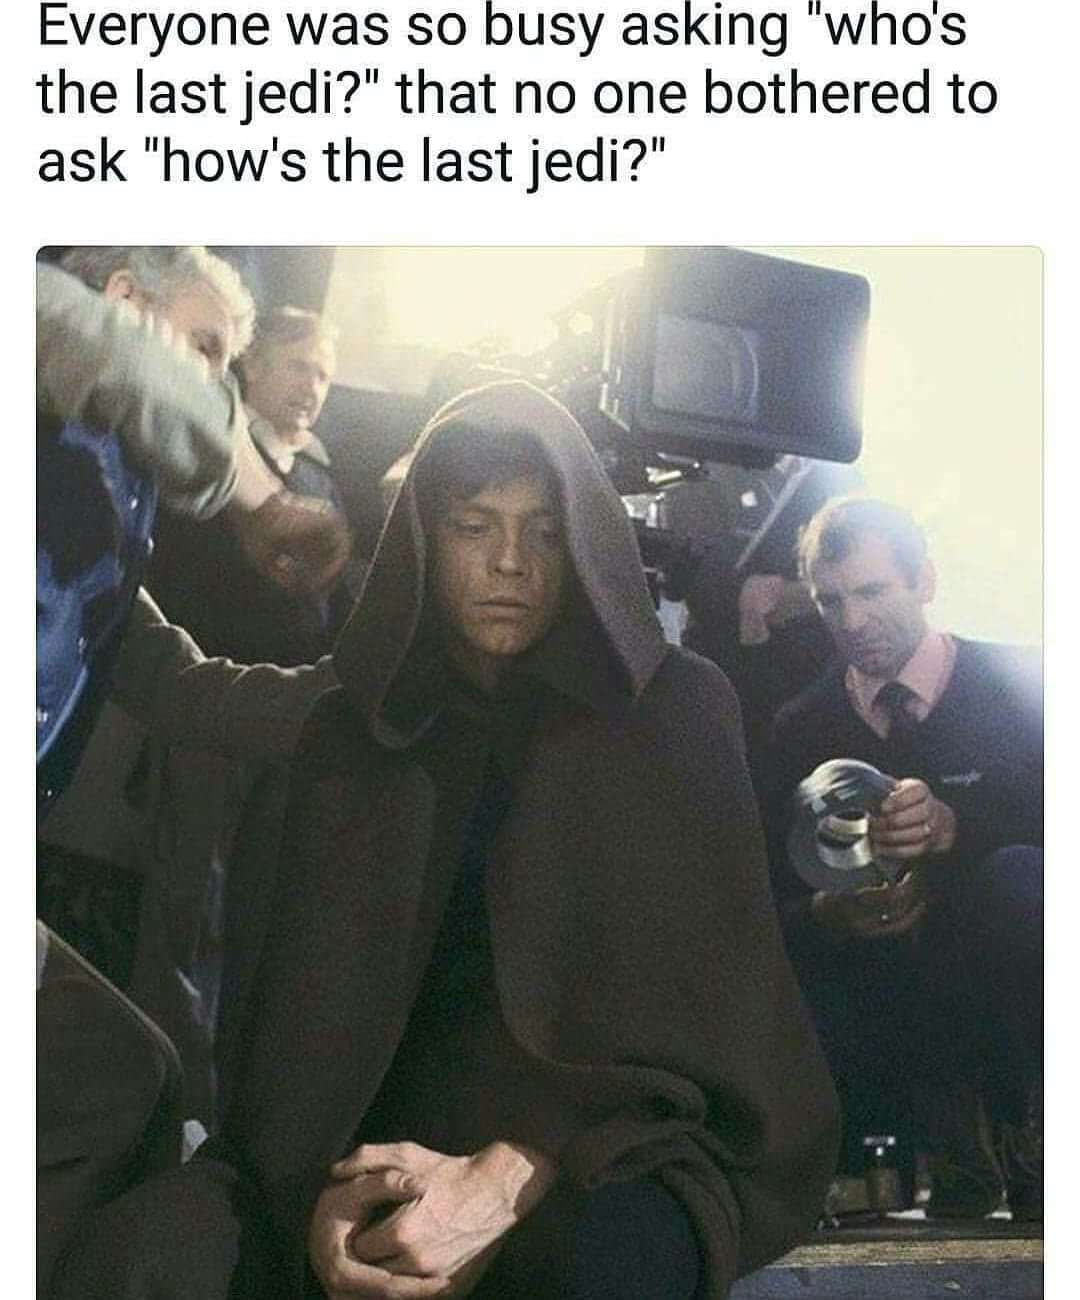 last jedi meme - Everyone was so busy asking "who's the last jedi?" that no one bothered to ask "how's the last jedi?"